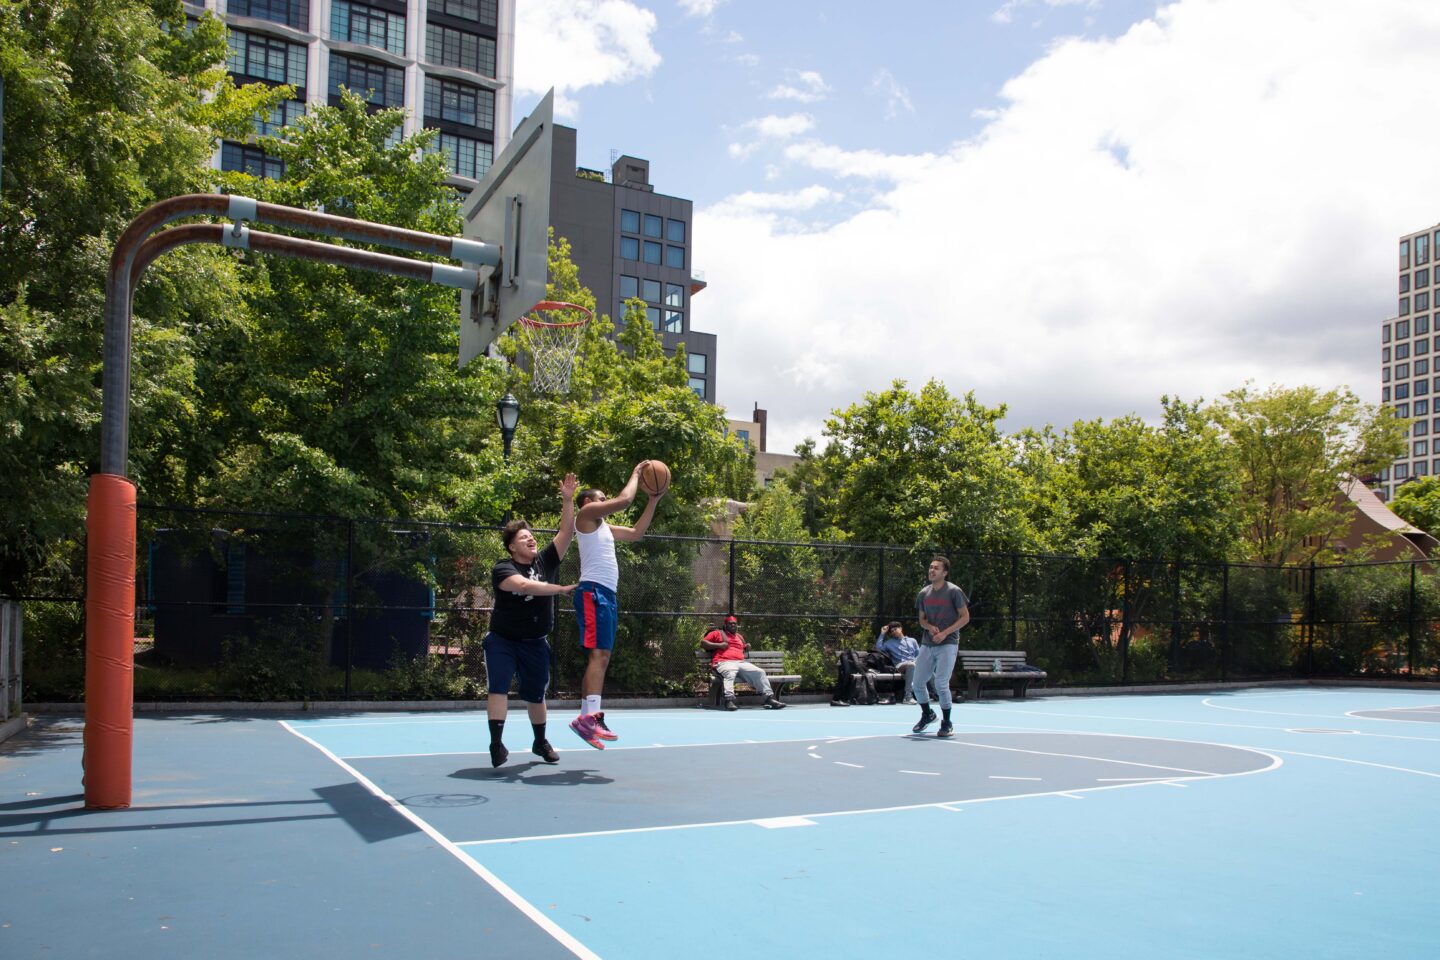 Basketball players having a game in Chelsea Waterside Park